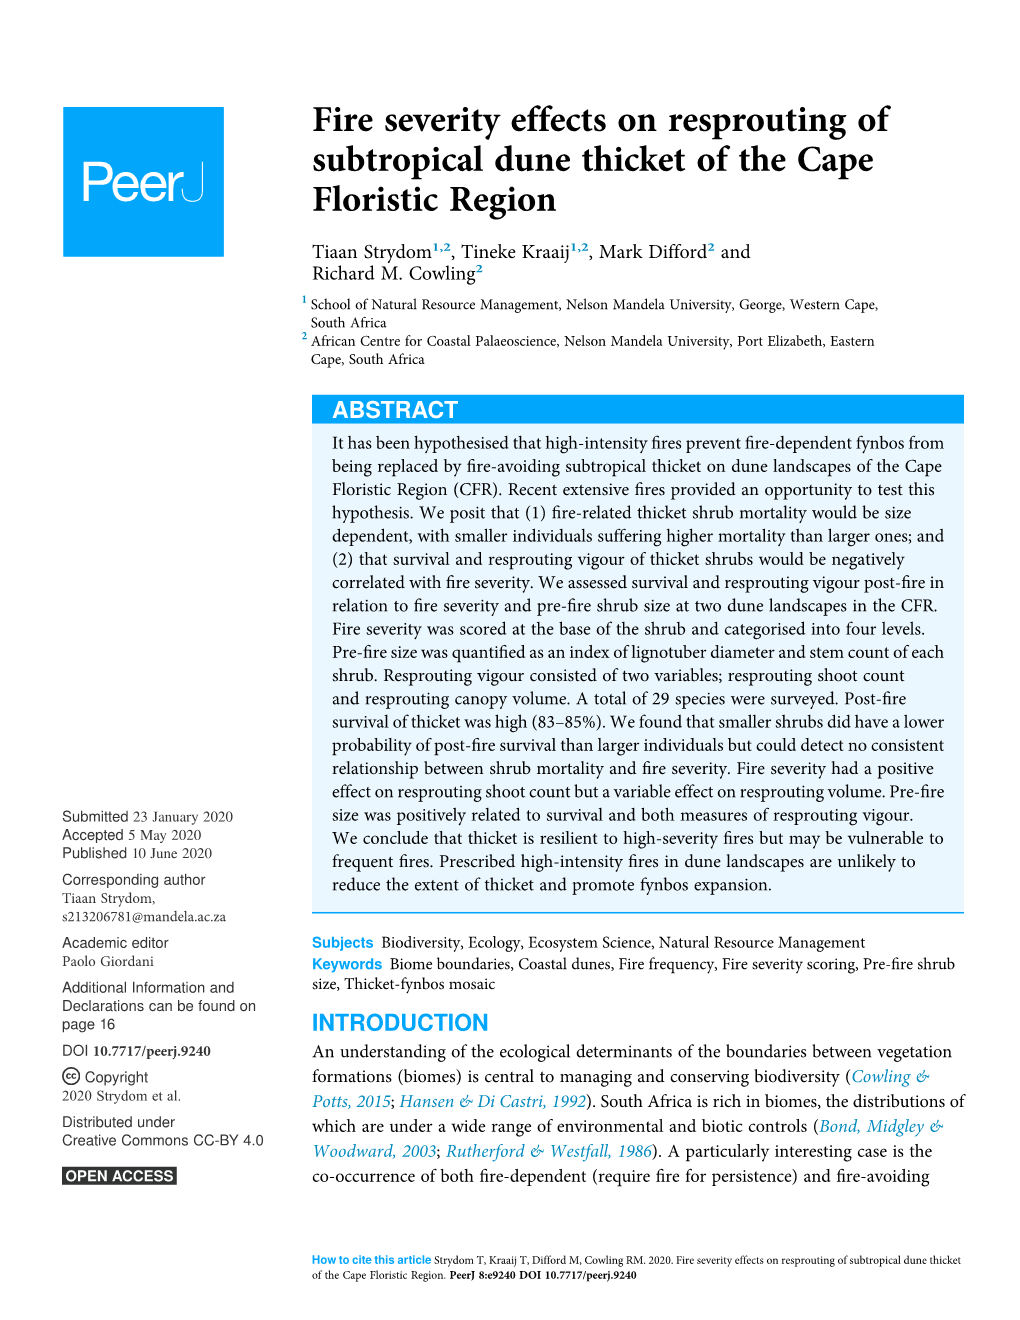 Fire Severity Effects on Resprouting of Subtropical Dune Thicket of the Cape Floristic Region